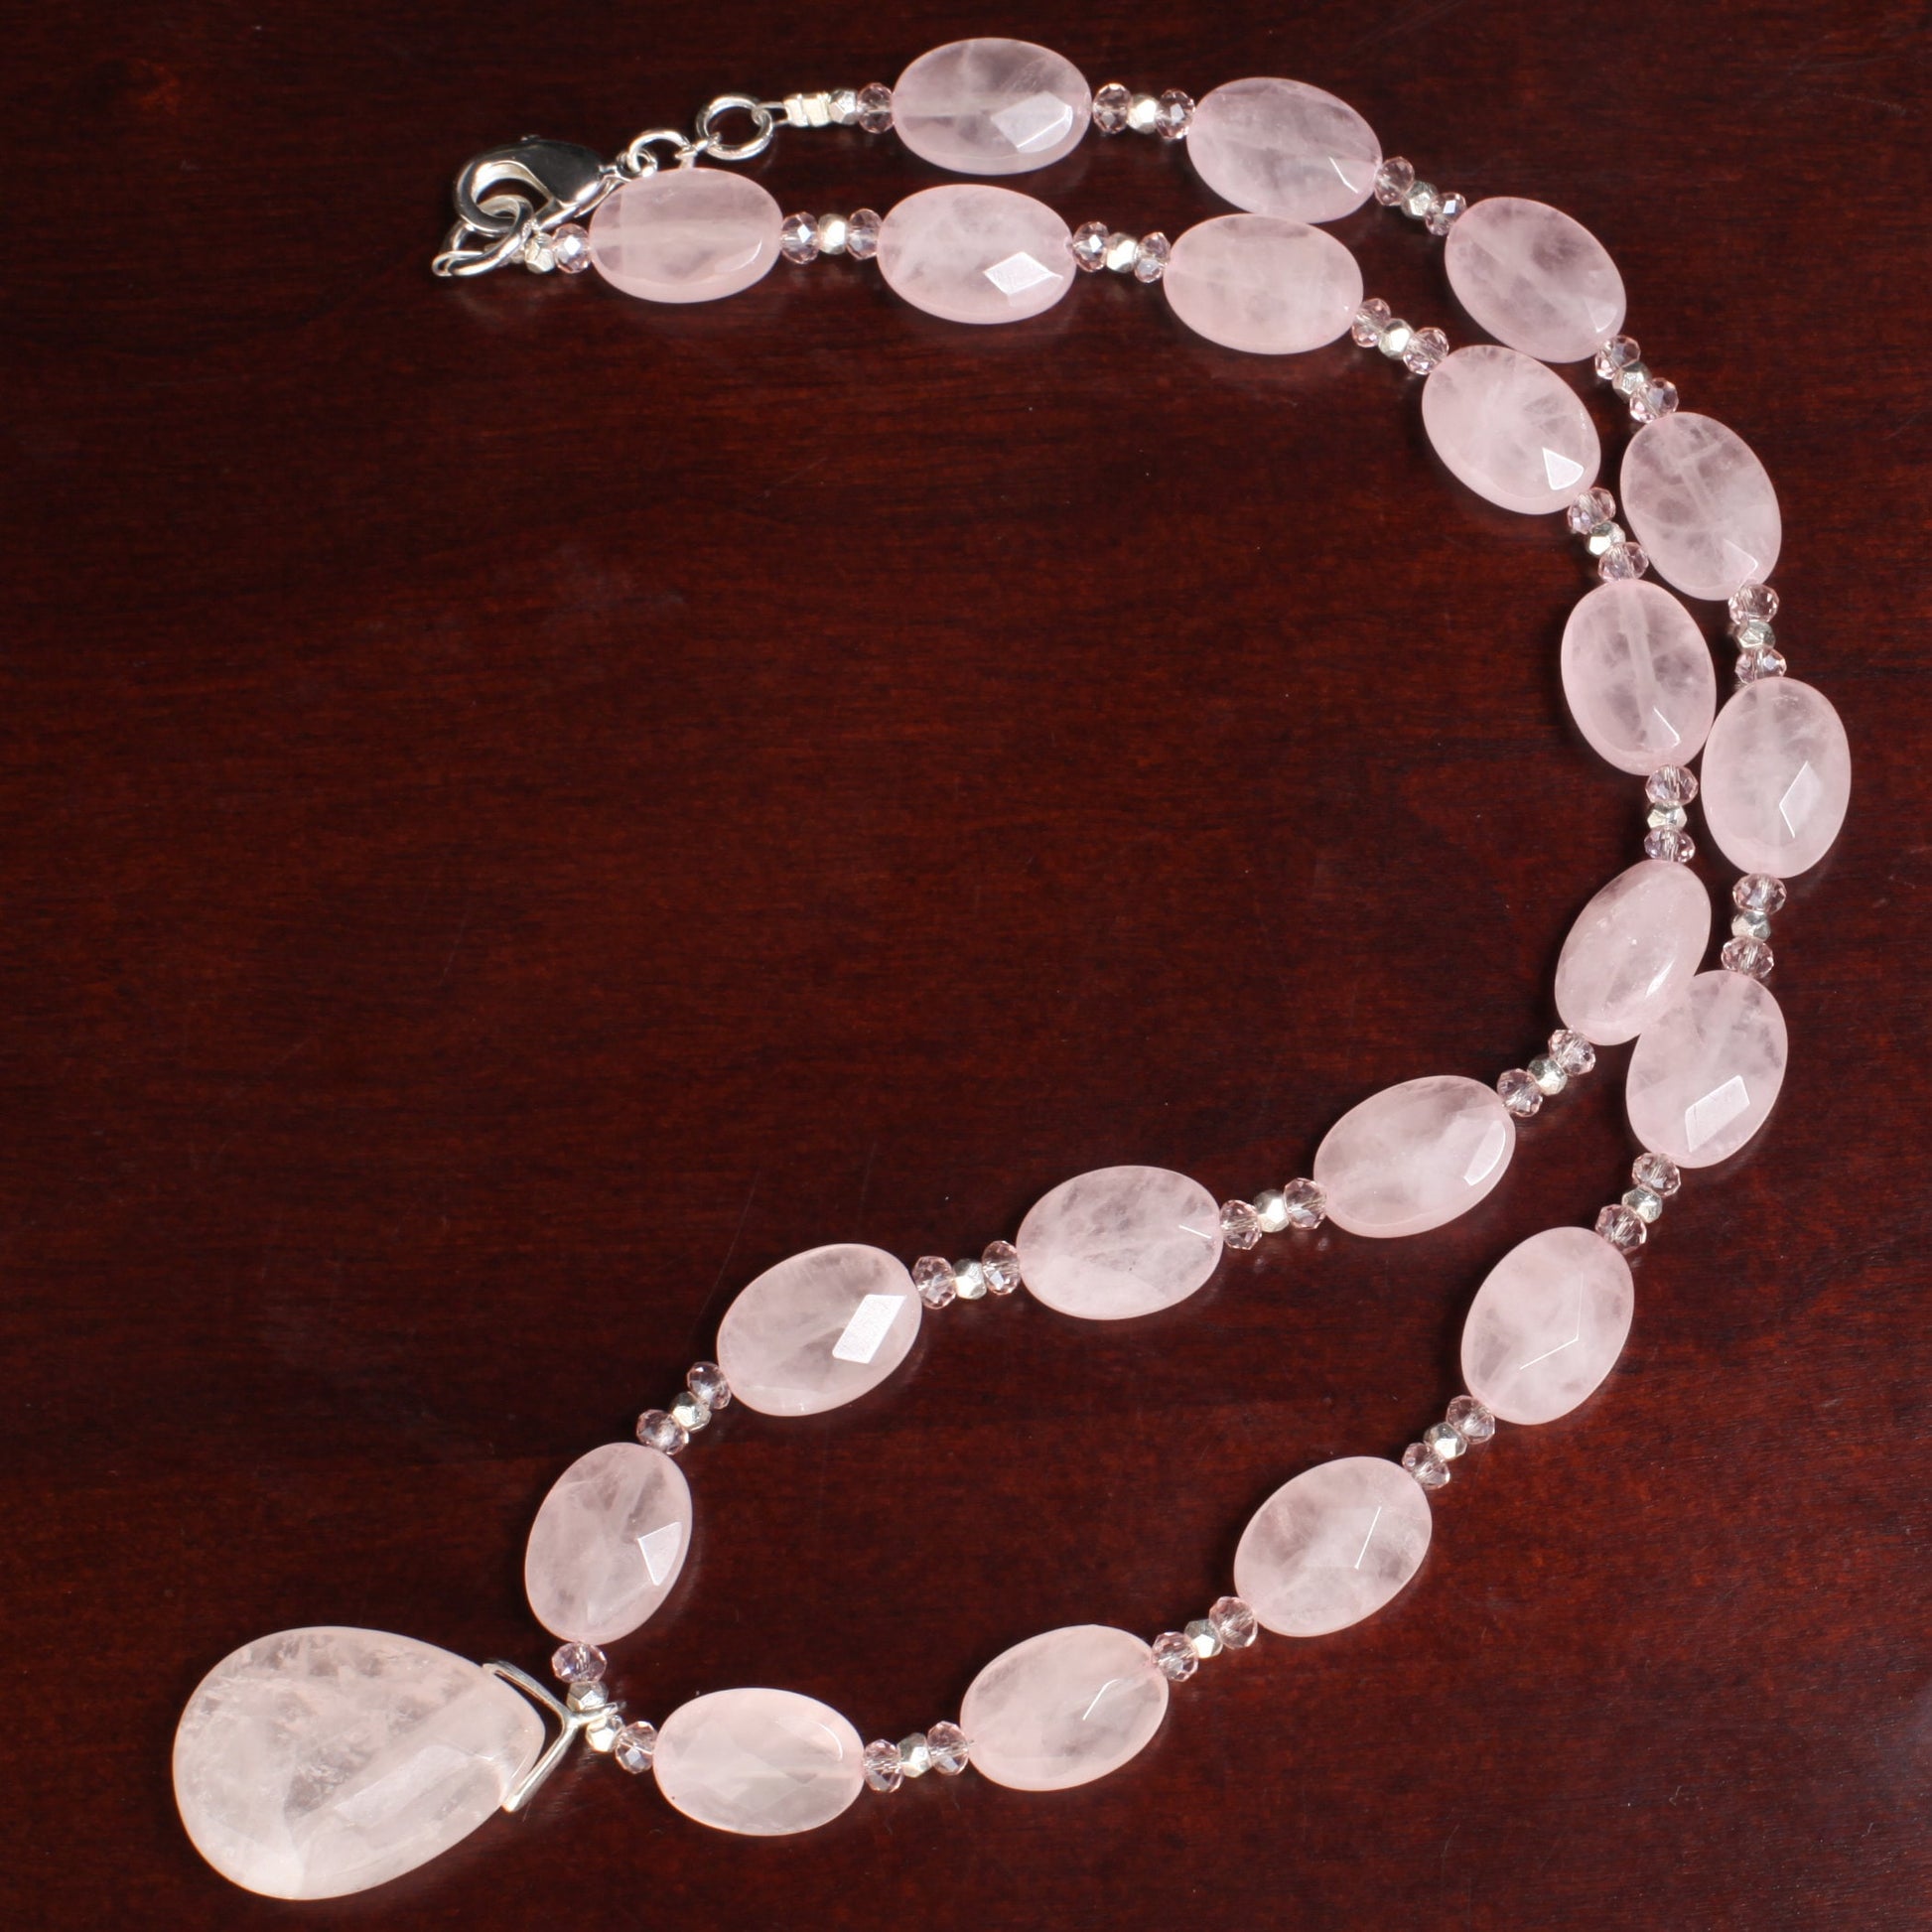 Madagascar Rose Quartz 10x14mm Faceted Oval with 18x25mm Faceted Teardrop Centerpiece Pendant 16" Necklace with 3" Extension Chain